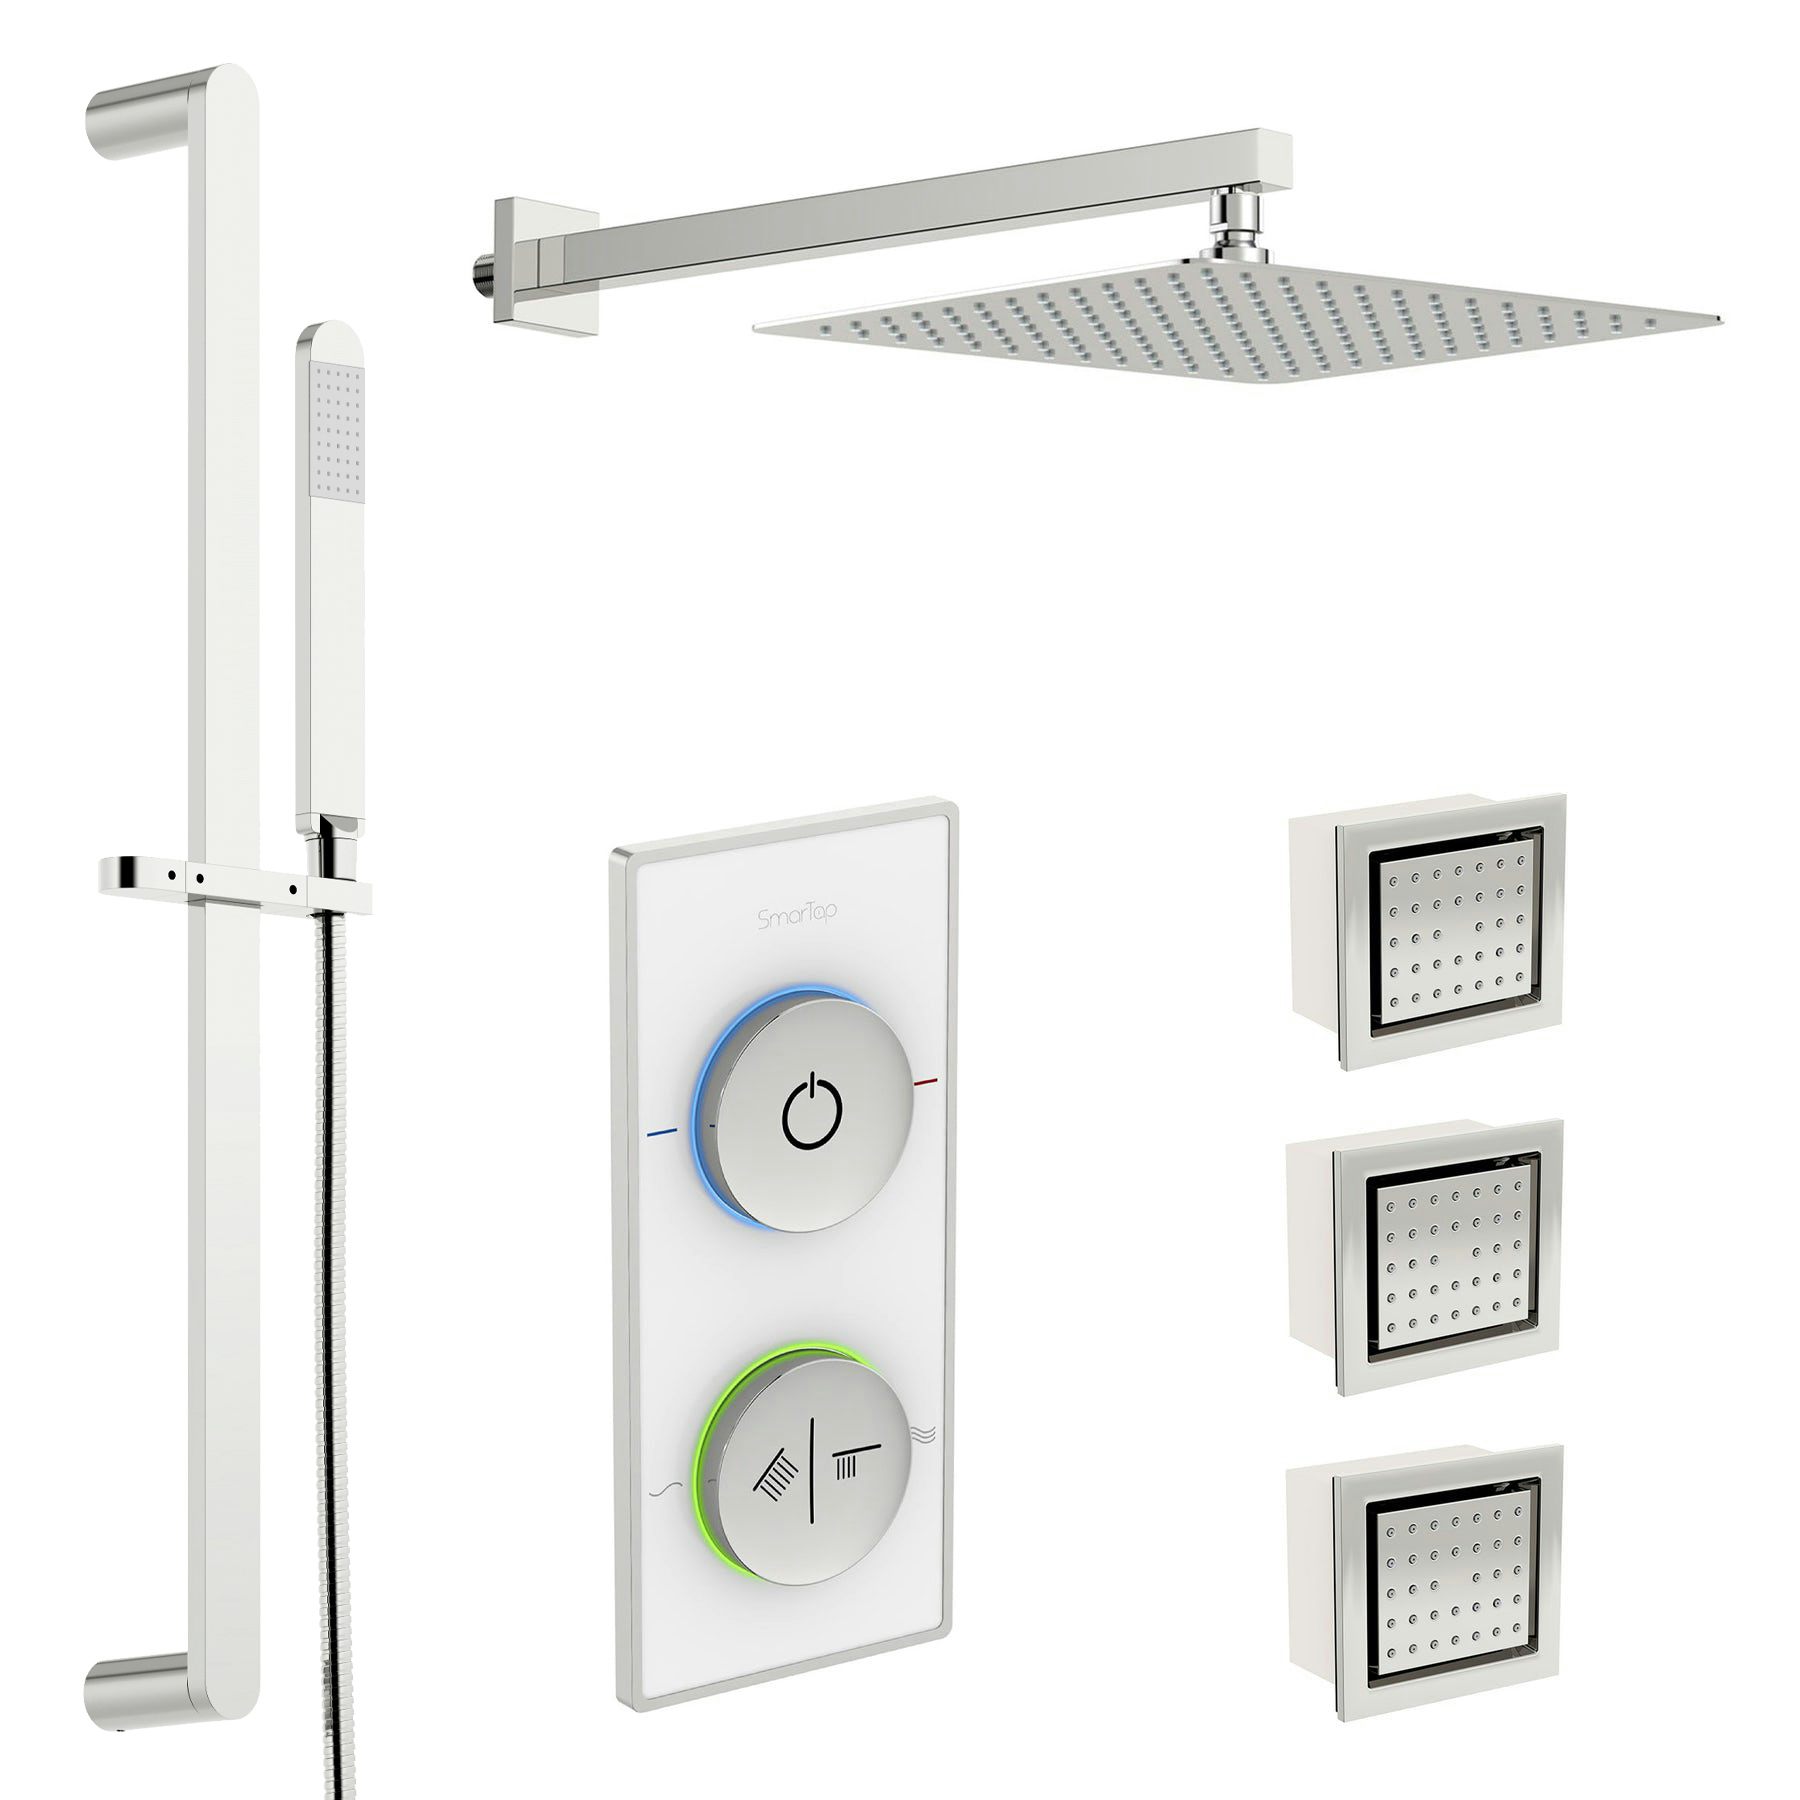 SmarTap white smart shower system with complete square wall shower set